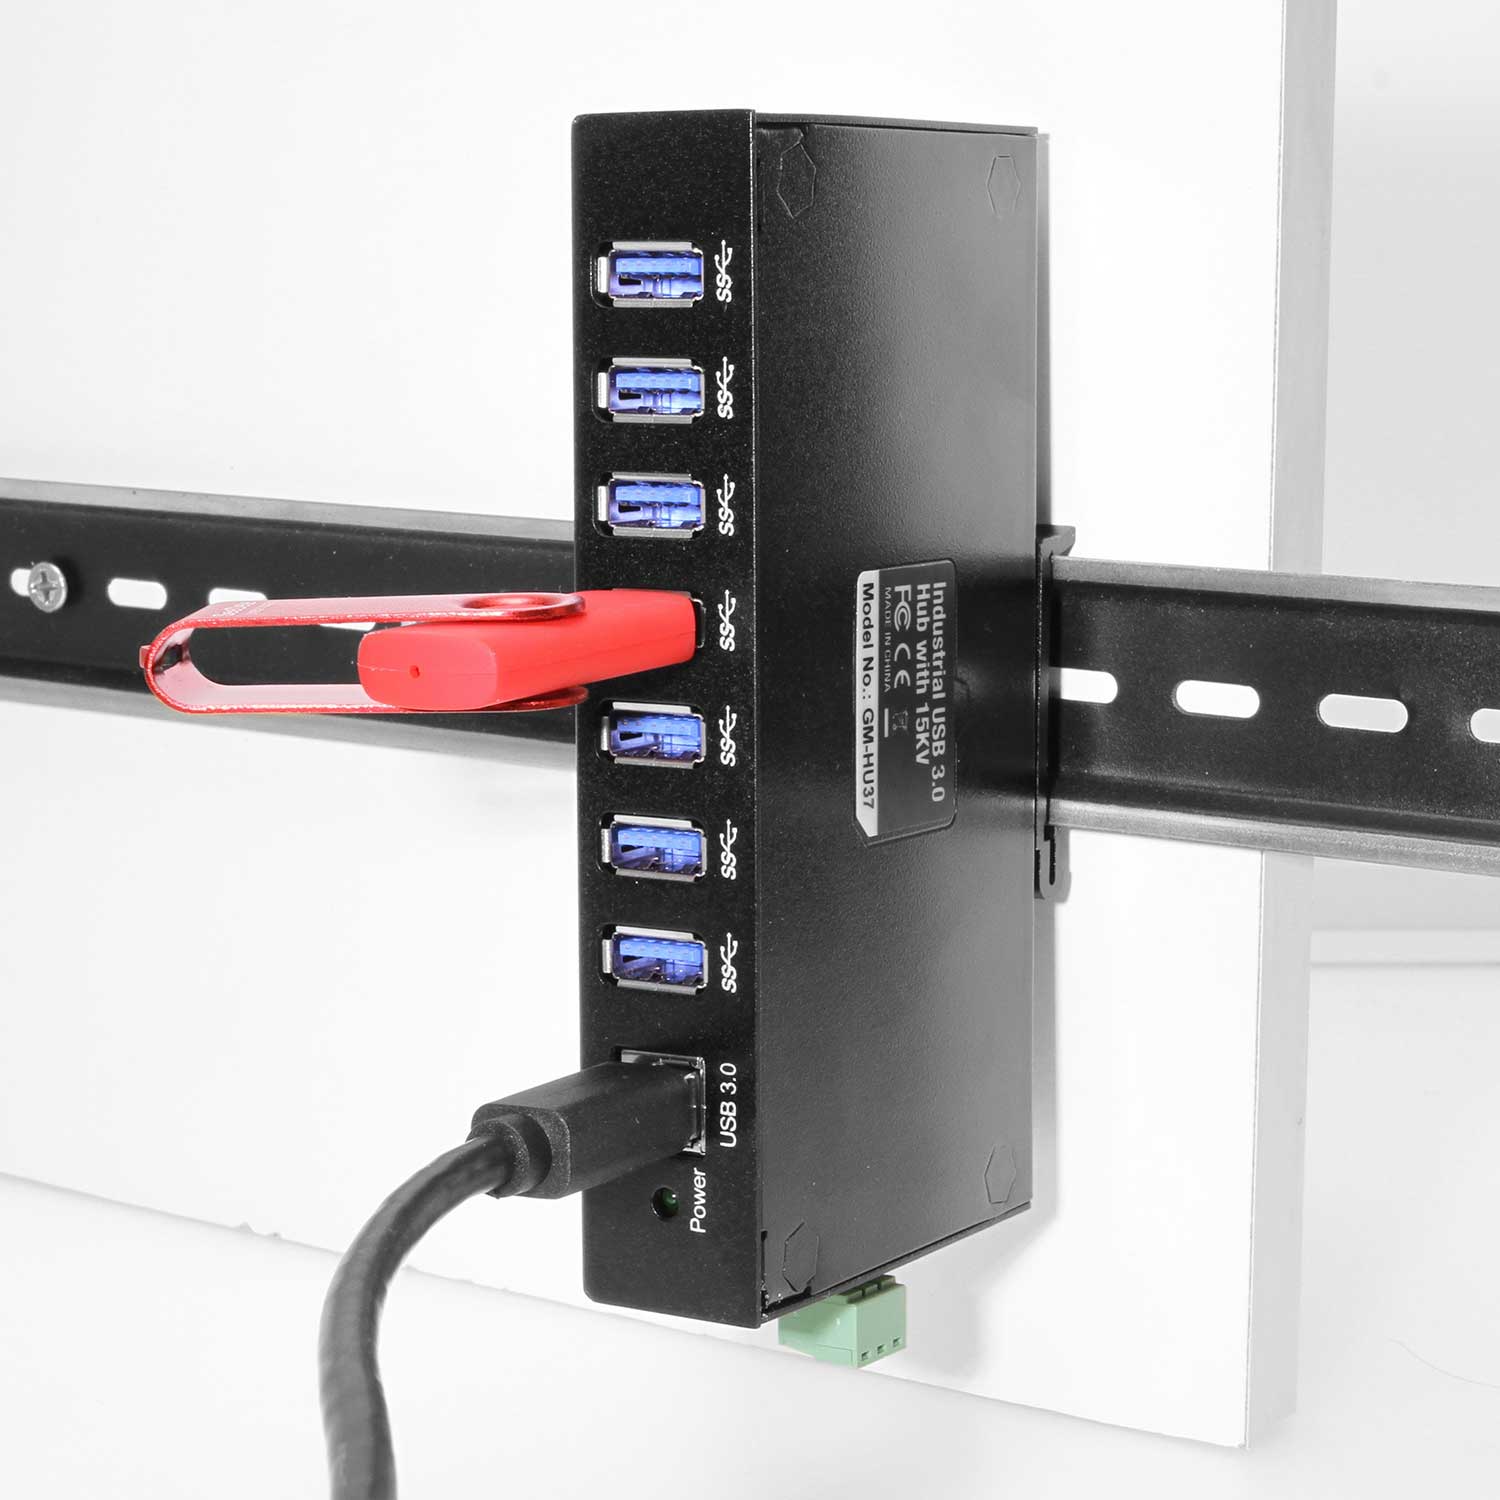 USB-C 7 Port Hub Surge Protected 3 Type-C and 5 Type-A Ports - DIN Rail  Mounting